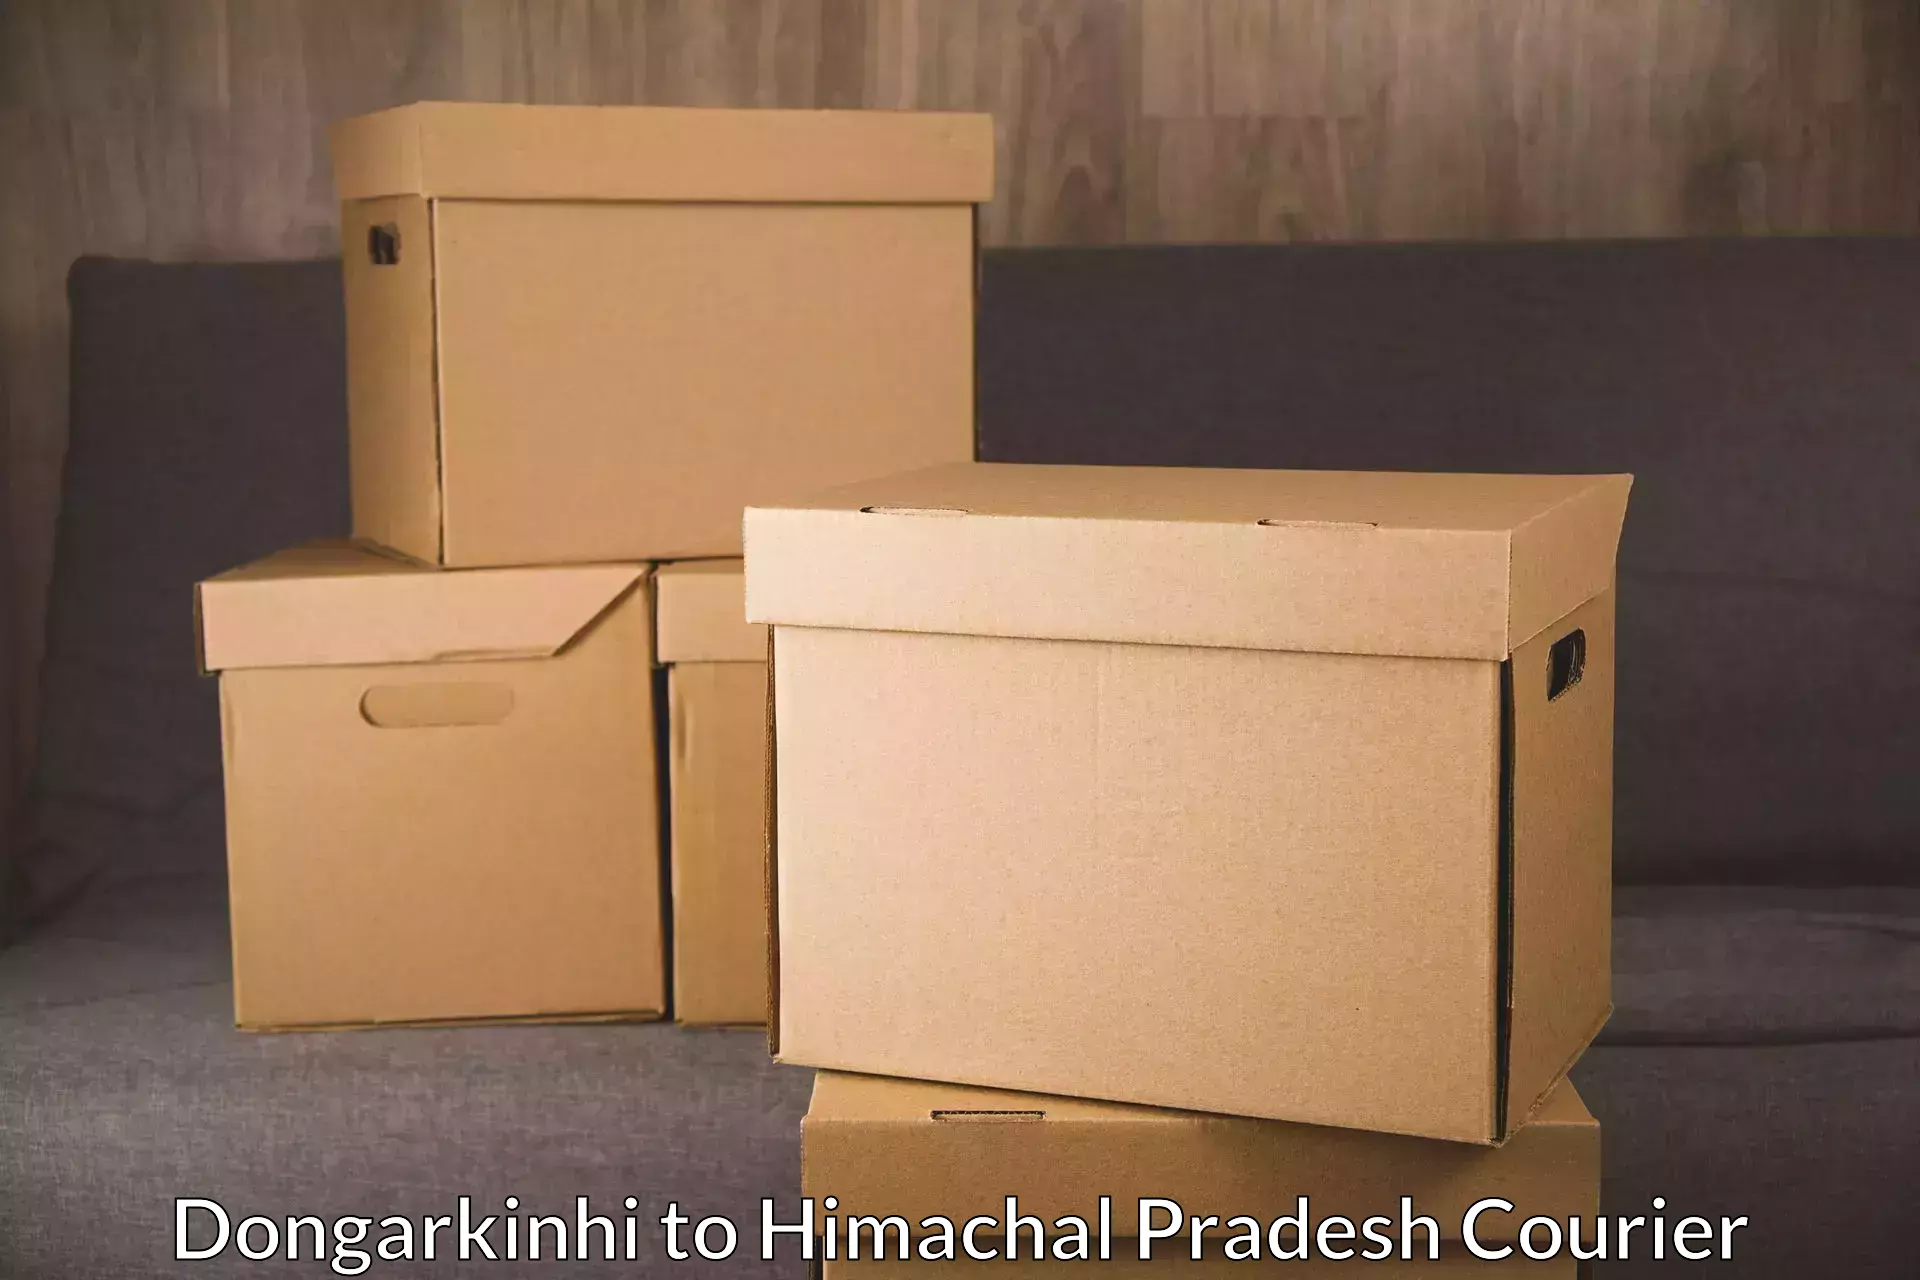 Parcel service for businesses Dongarkinhi to Himachal Pradesh